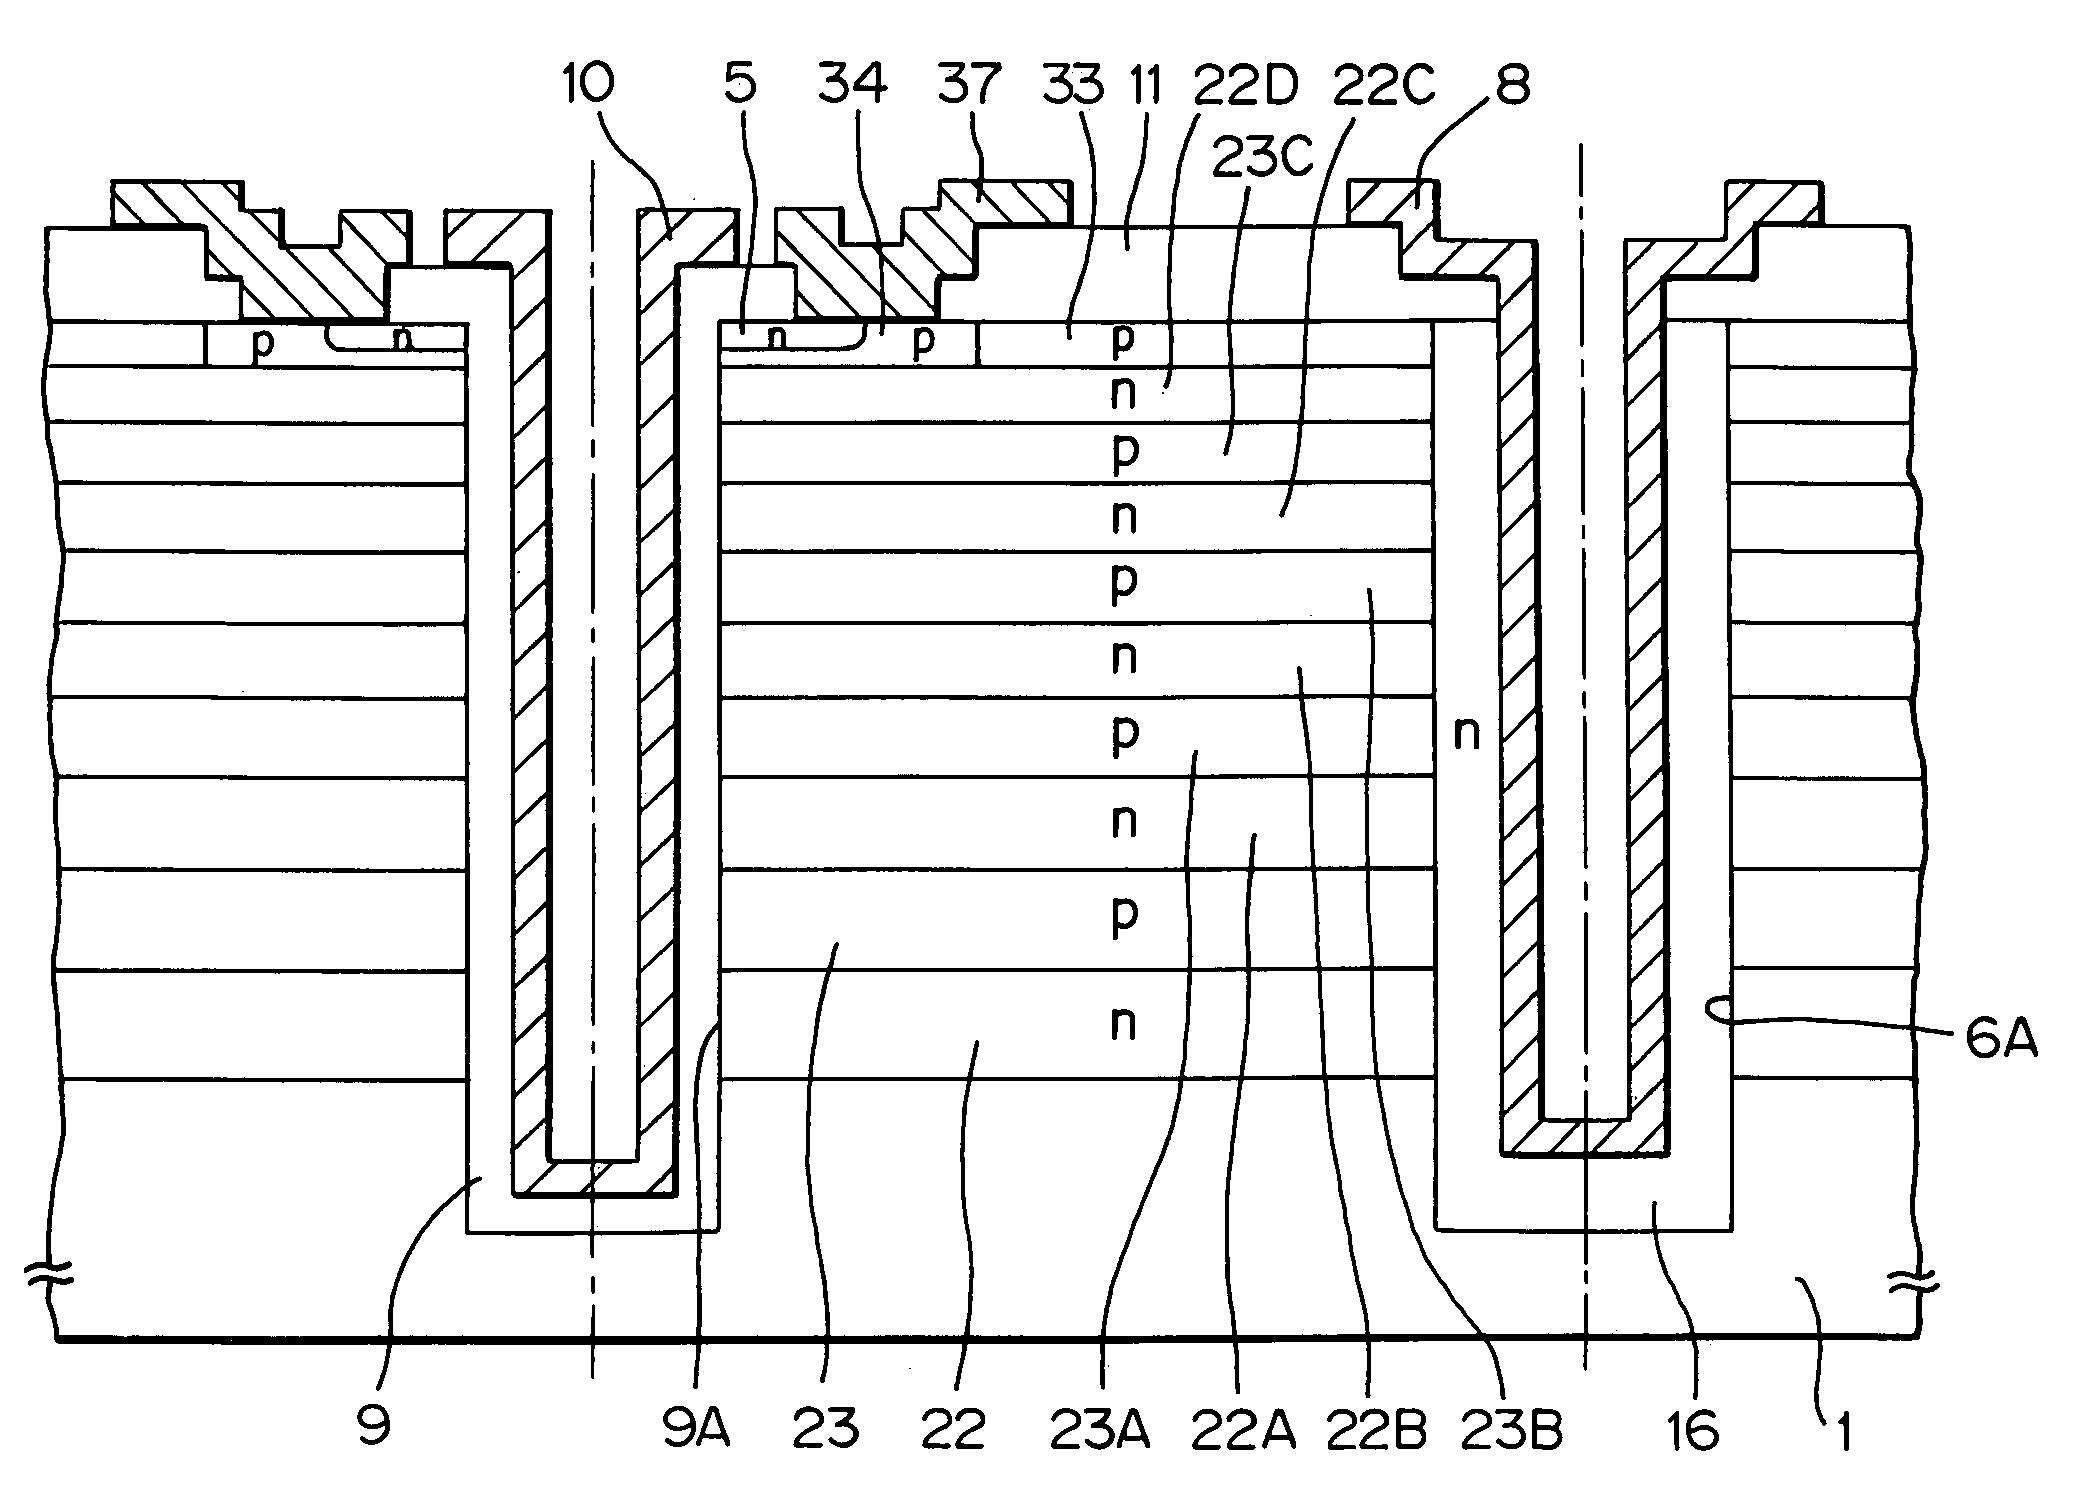 High-voltage power semiconductor device with body regions of alternating conductivity and decreasing thickness